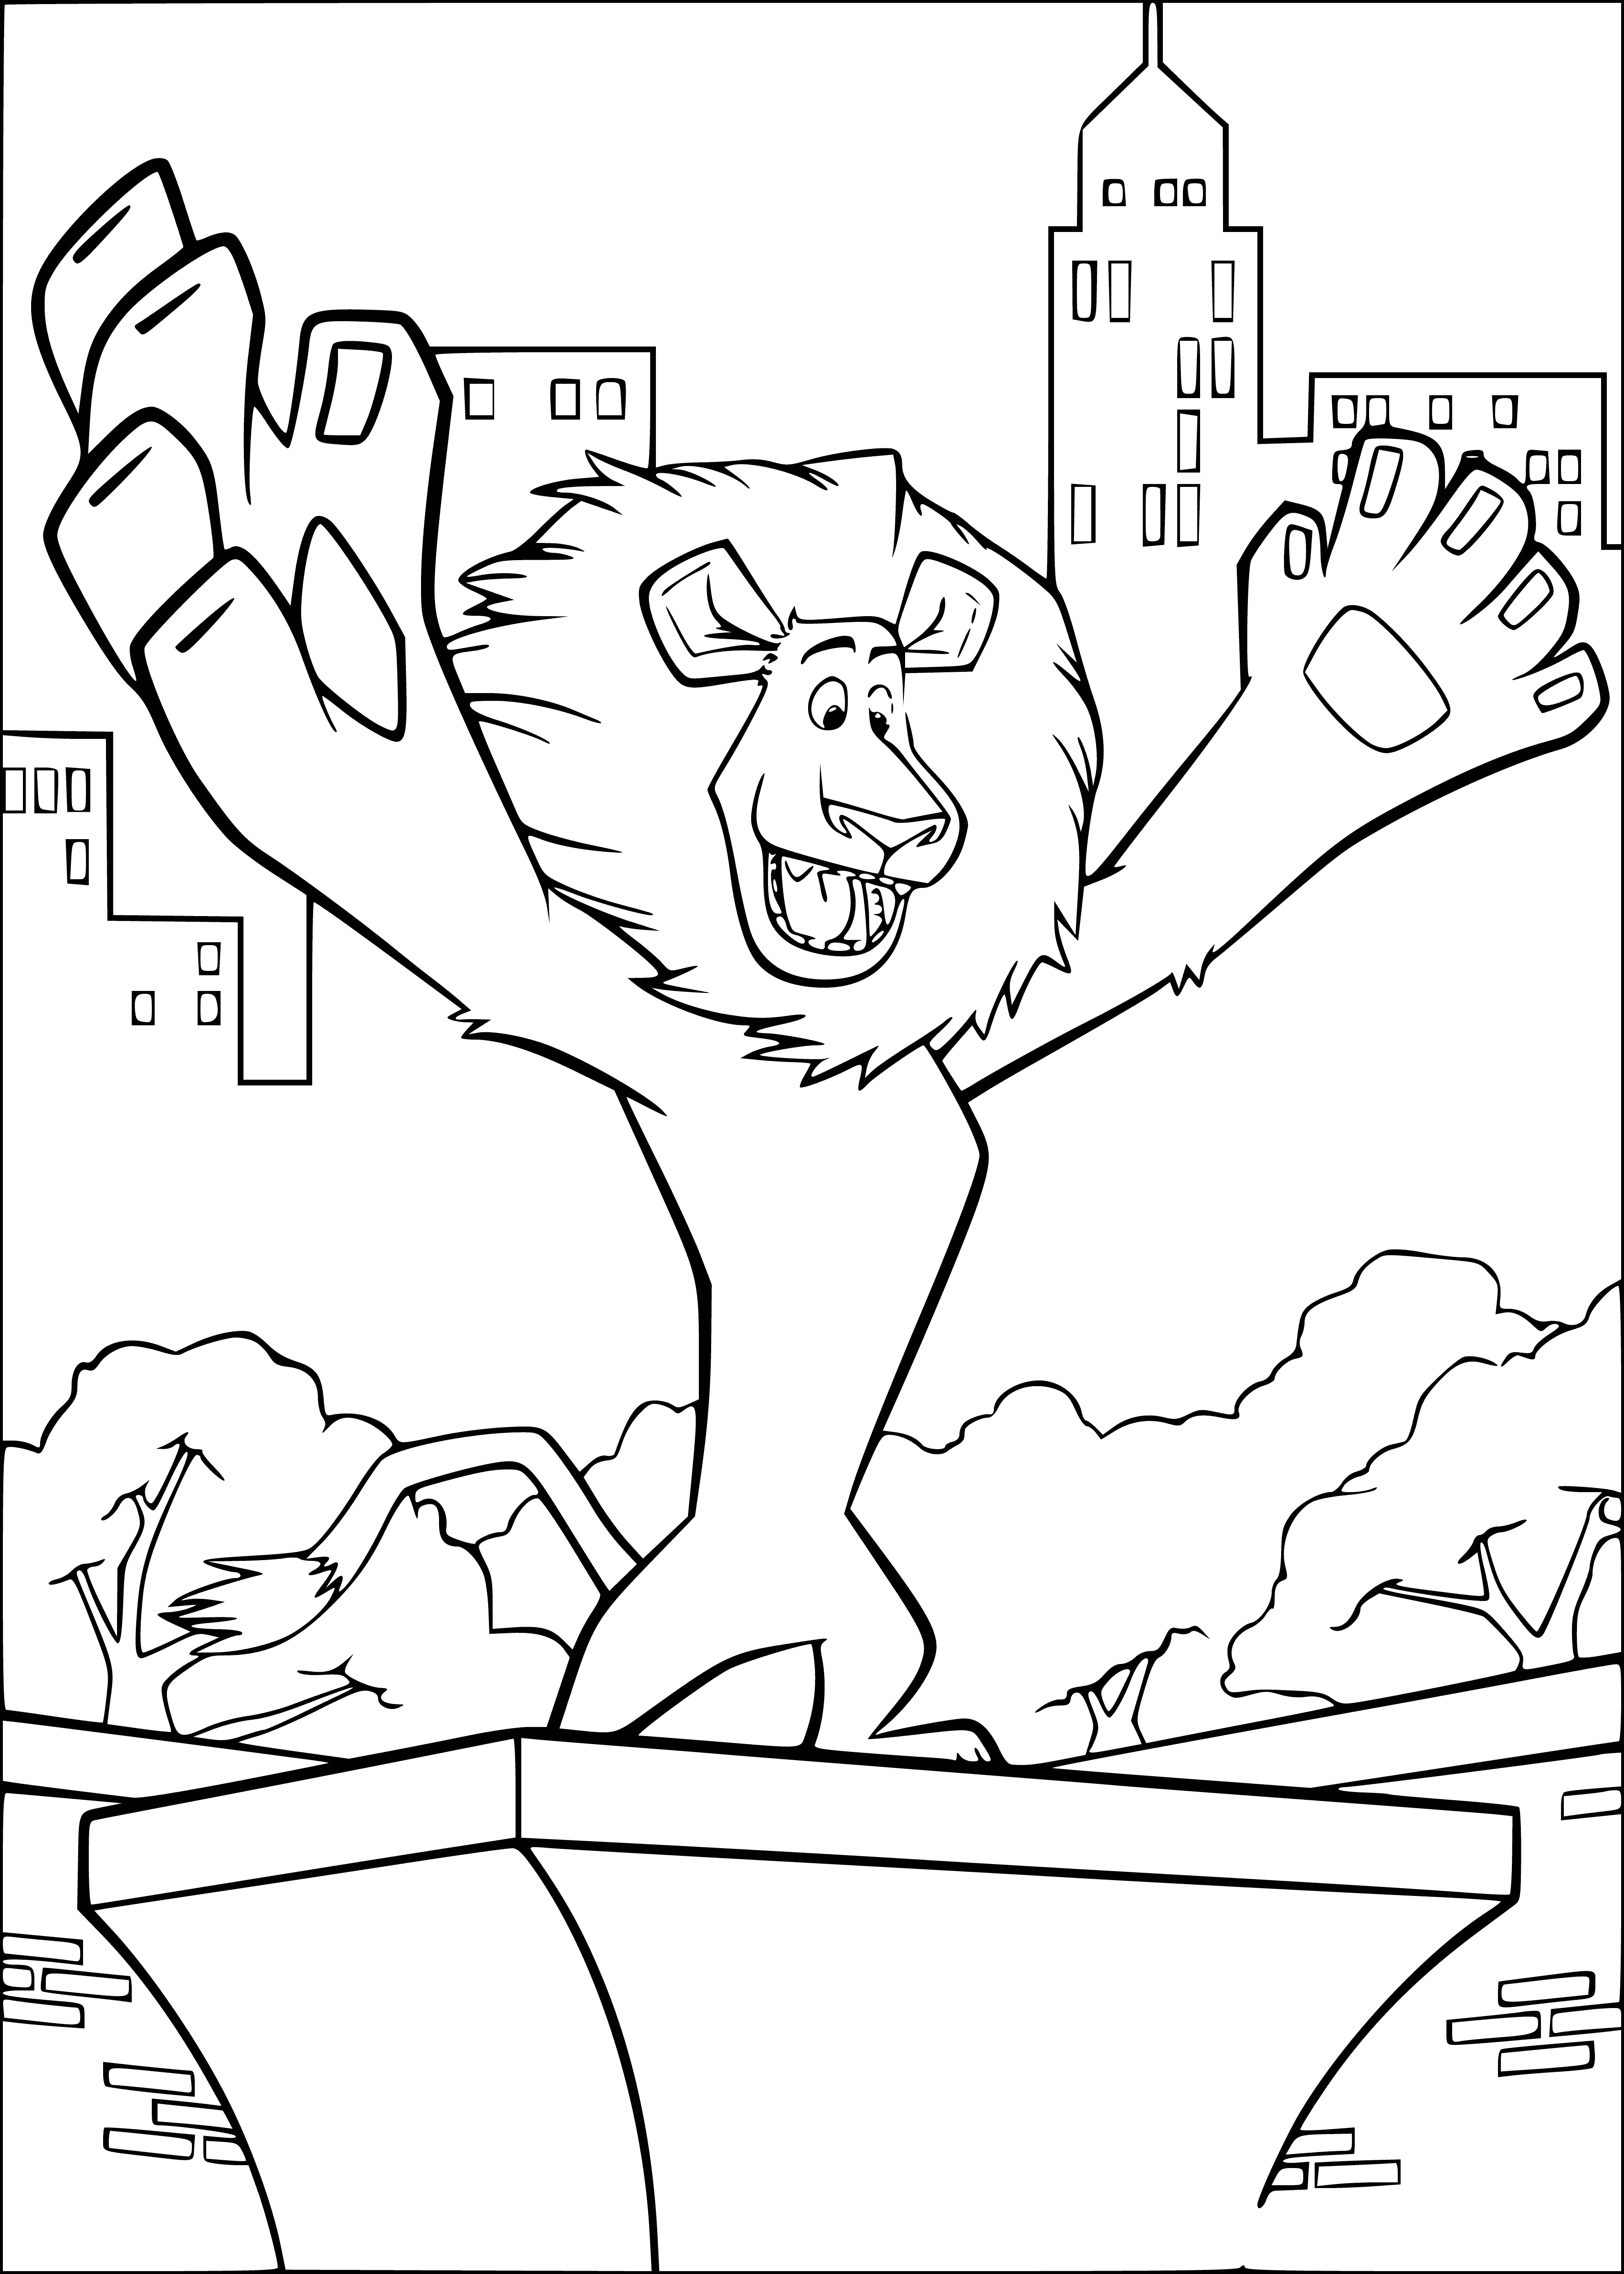 coloring page: Alex the alligator stands with arms outstretched in an orange, green, and purple outfit with a yellow star - perfectly toothy grin!